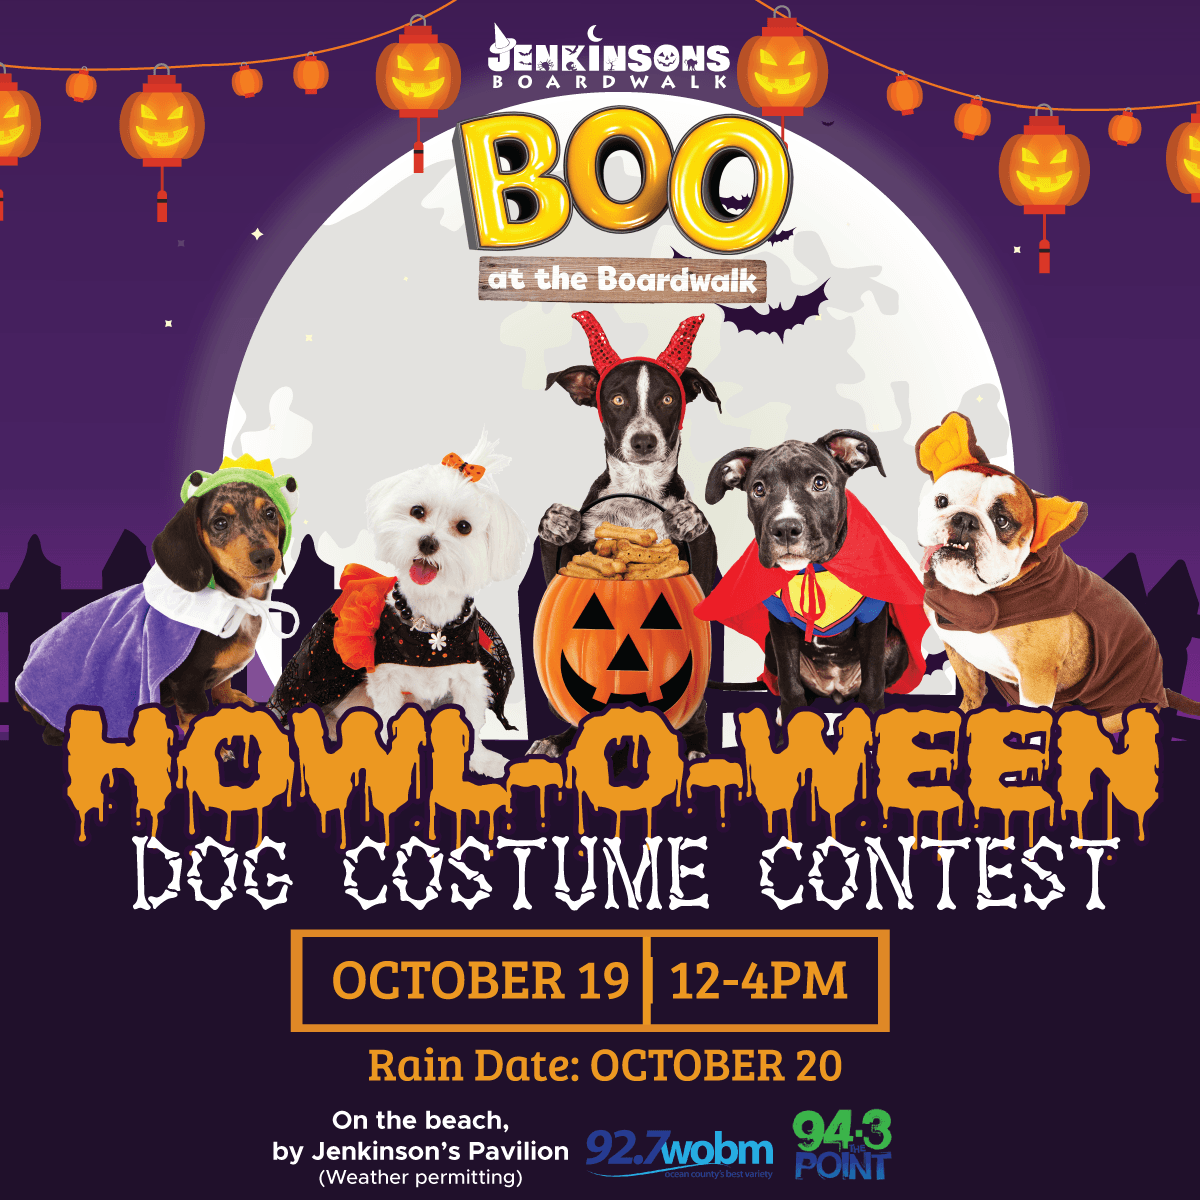 Jenkinson's Boo at the Boardwalk Howl-O-Ween Dog Costume Contest, Oct 19 12-4pm. Raindate is Oct 20.